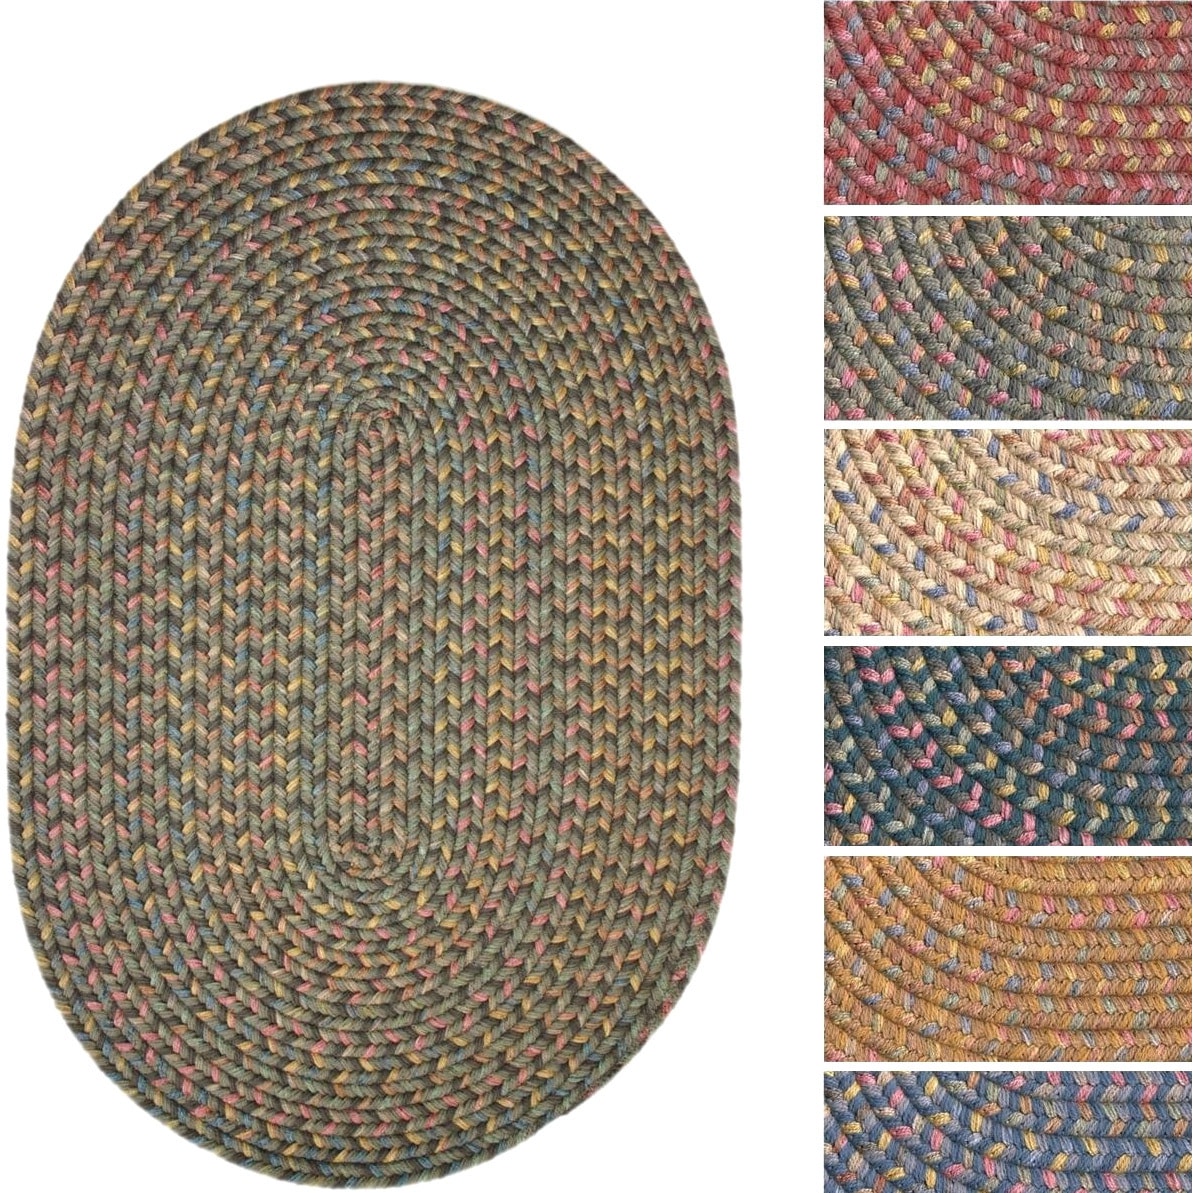 Bouquet Multicolored Braided Area Rug (5 X 8 Oval)